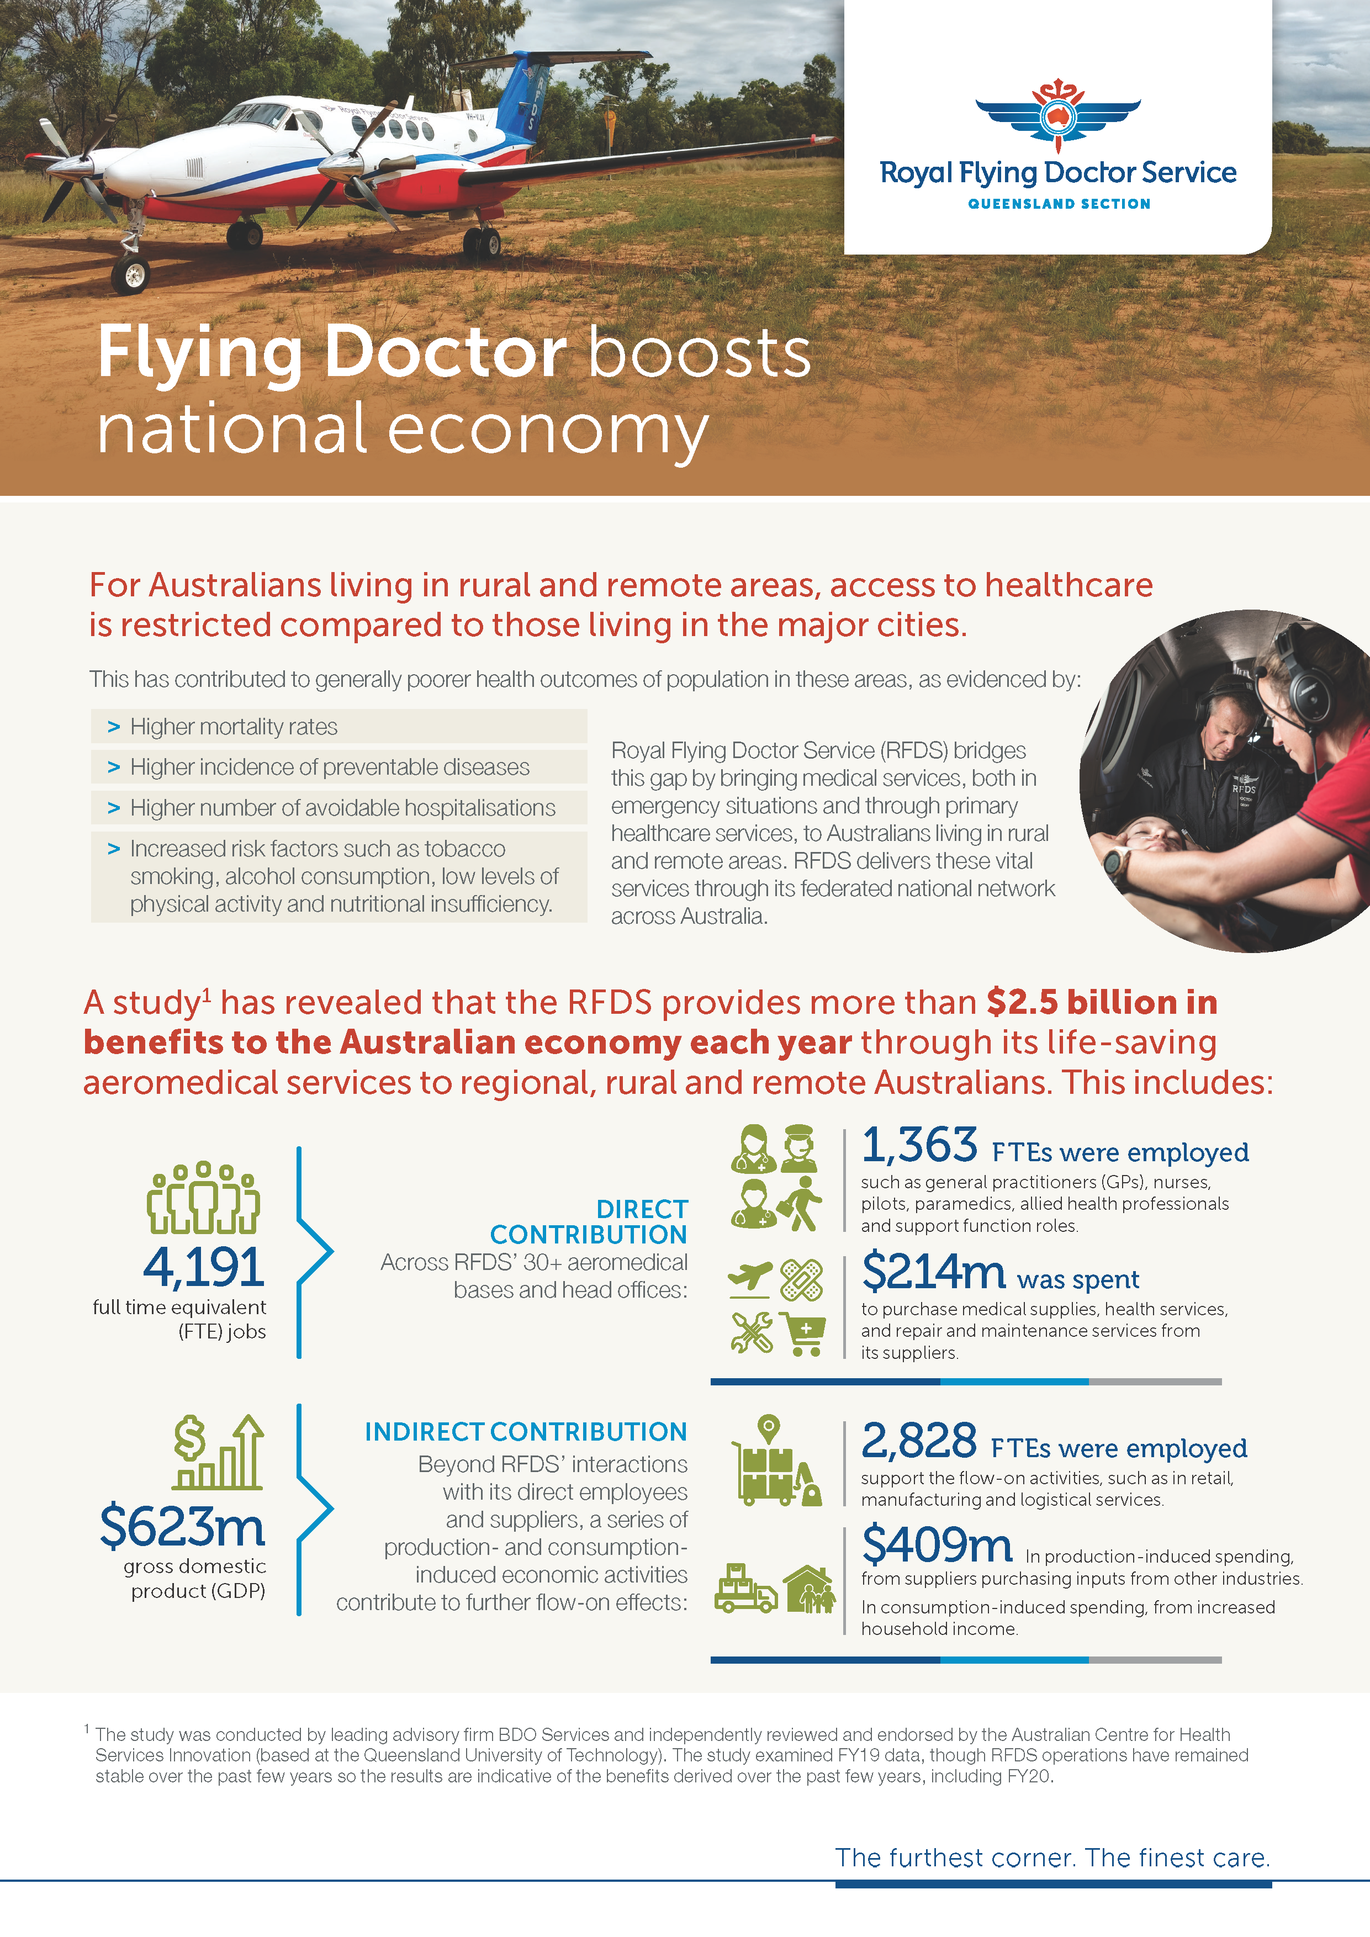 Flyer outlining the economic contribution of the RFDS last financial year.